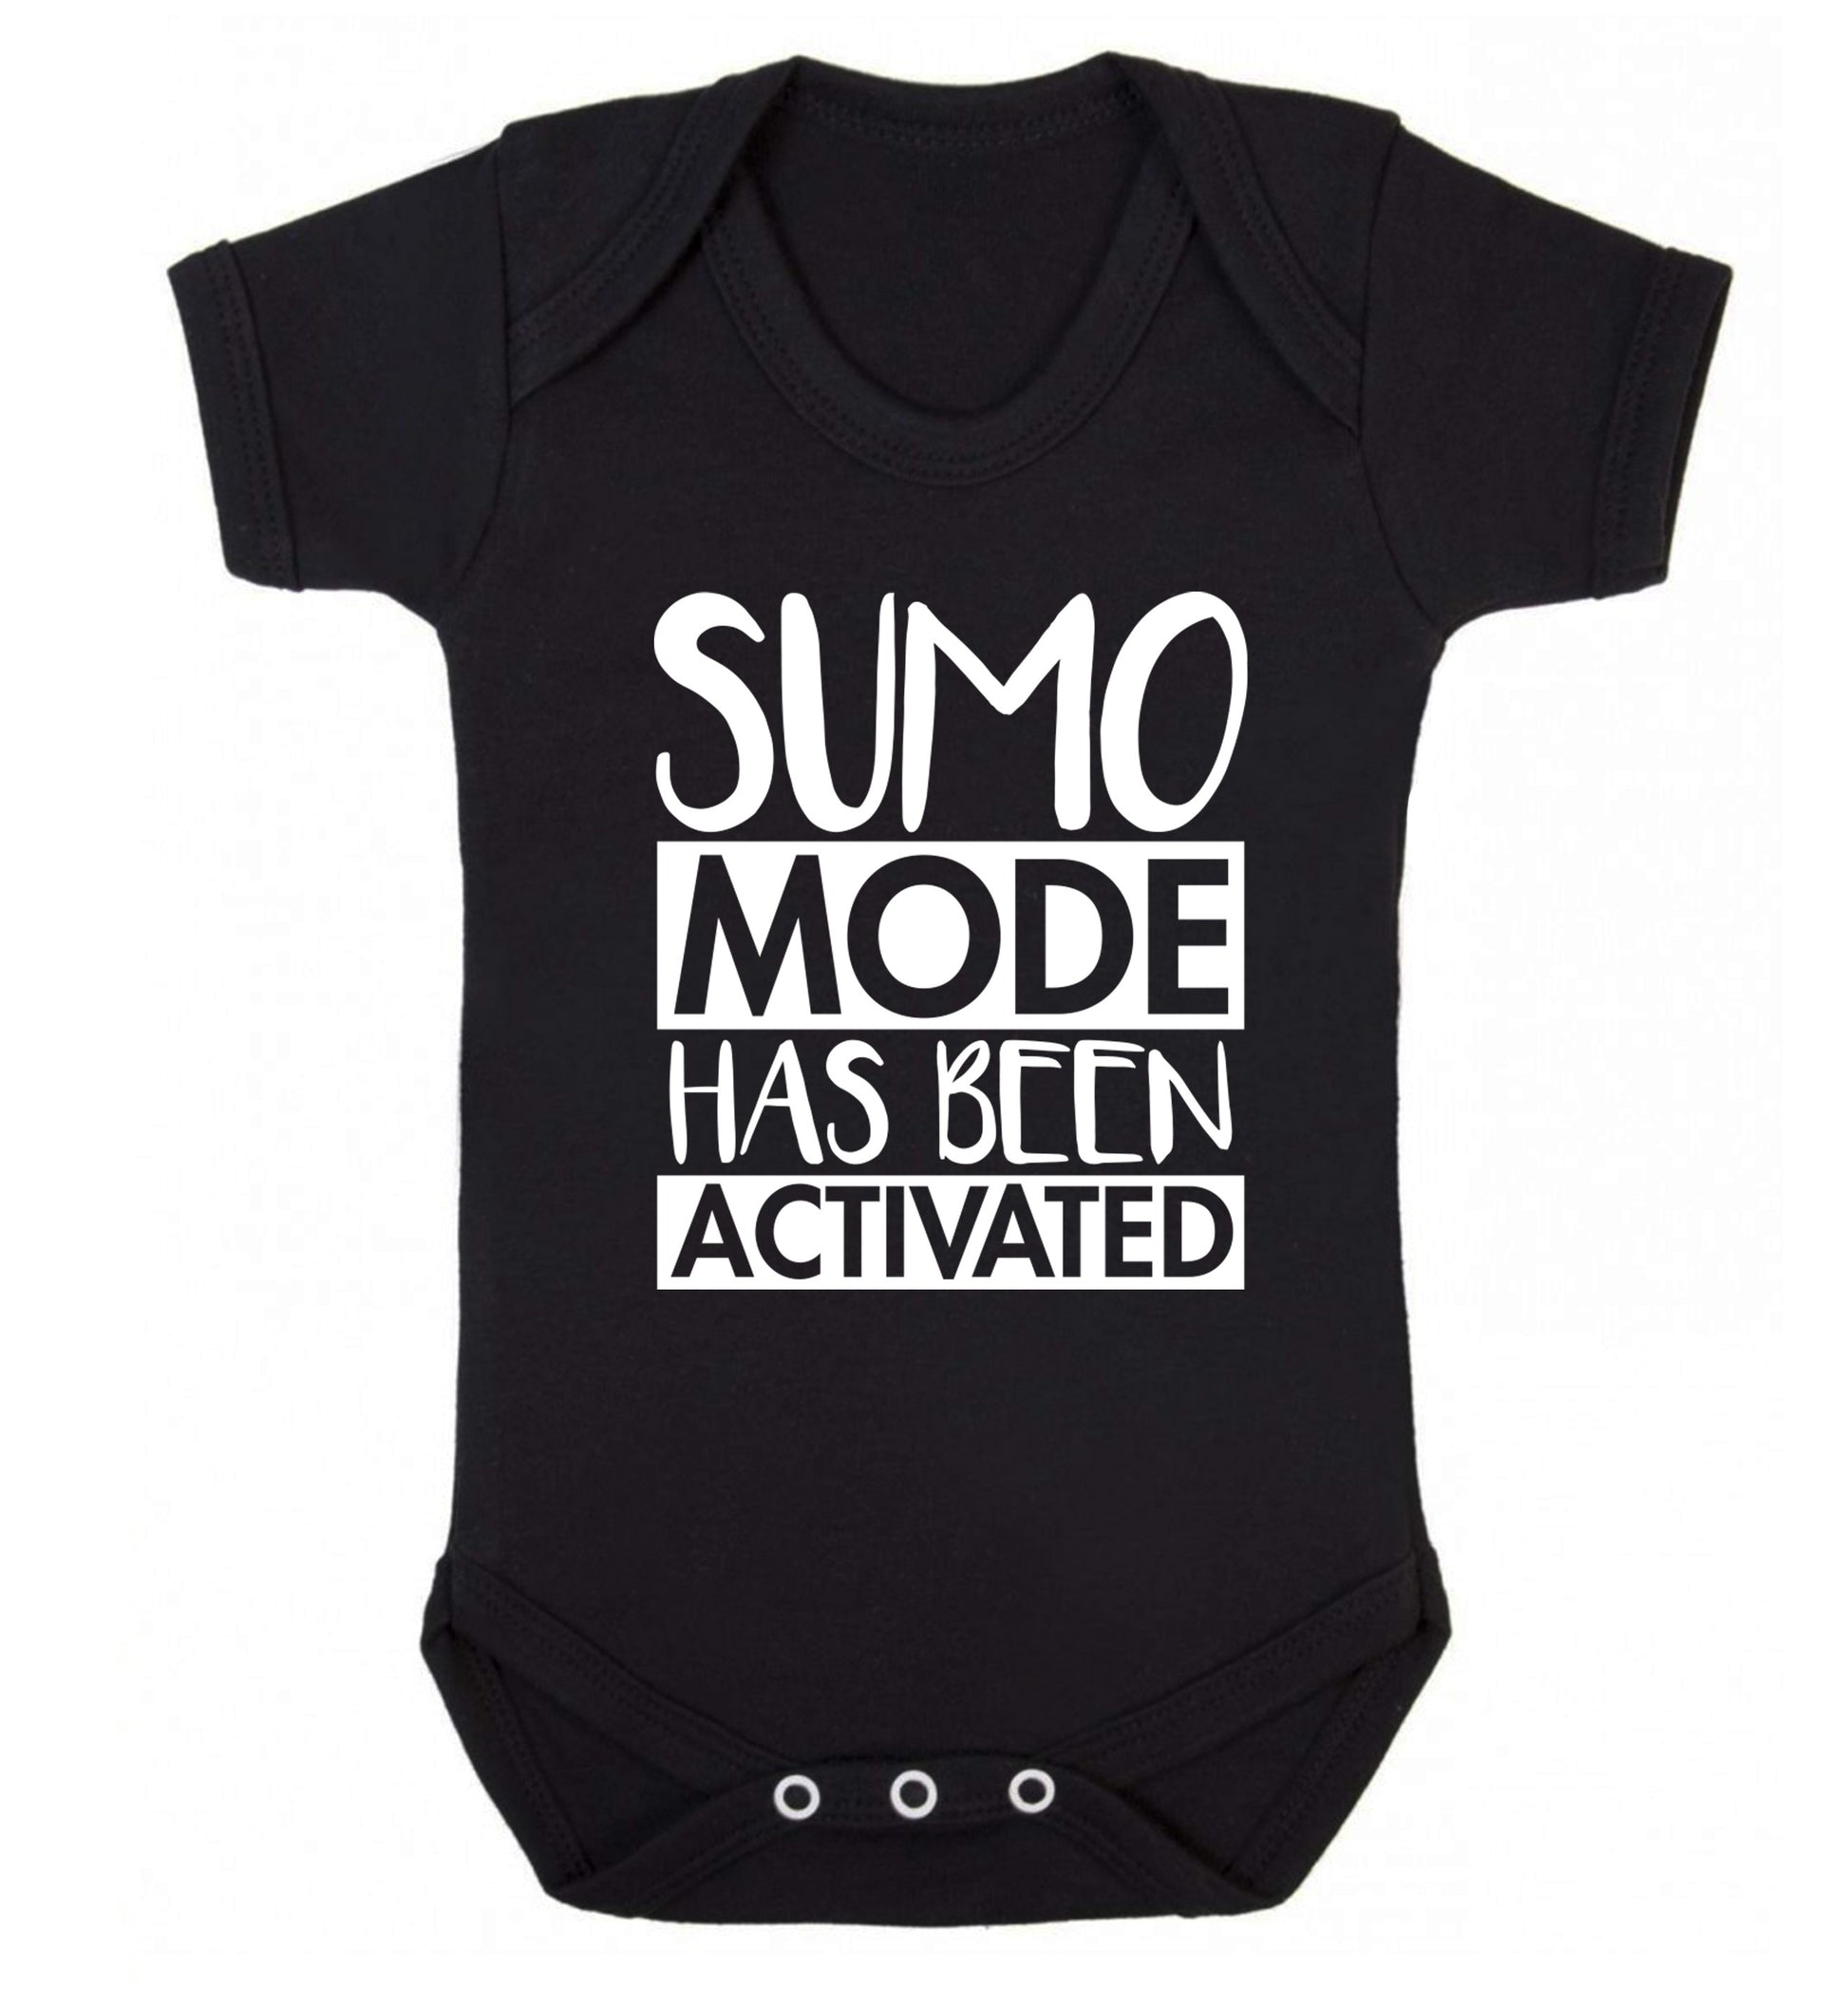 Sumo mode activated Baby Vest black 18-24 months